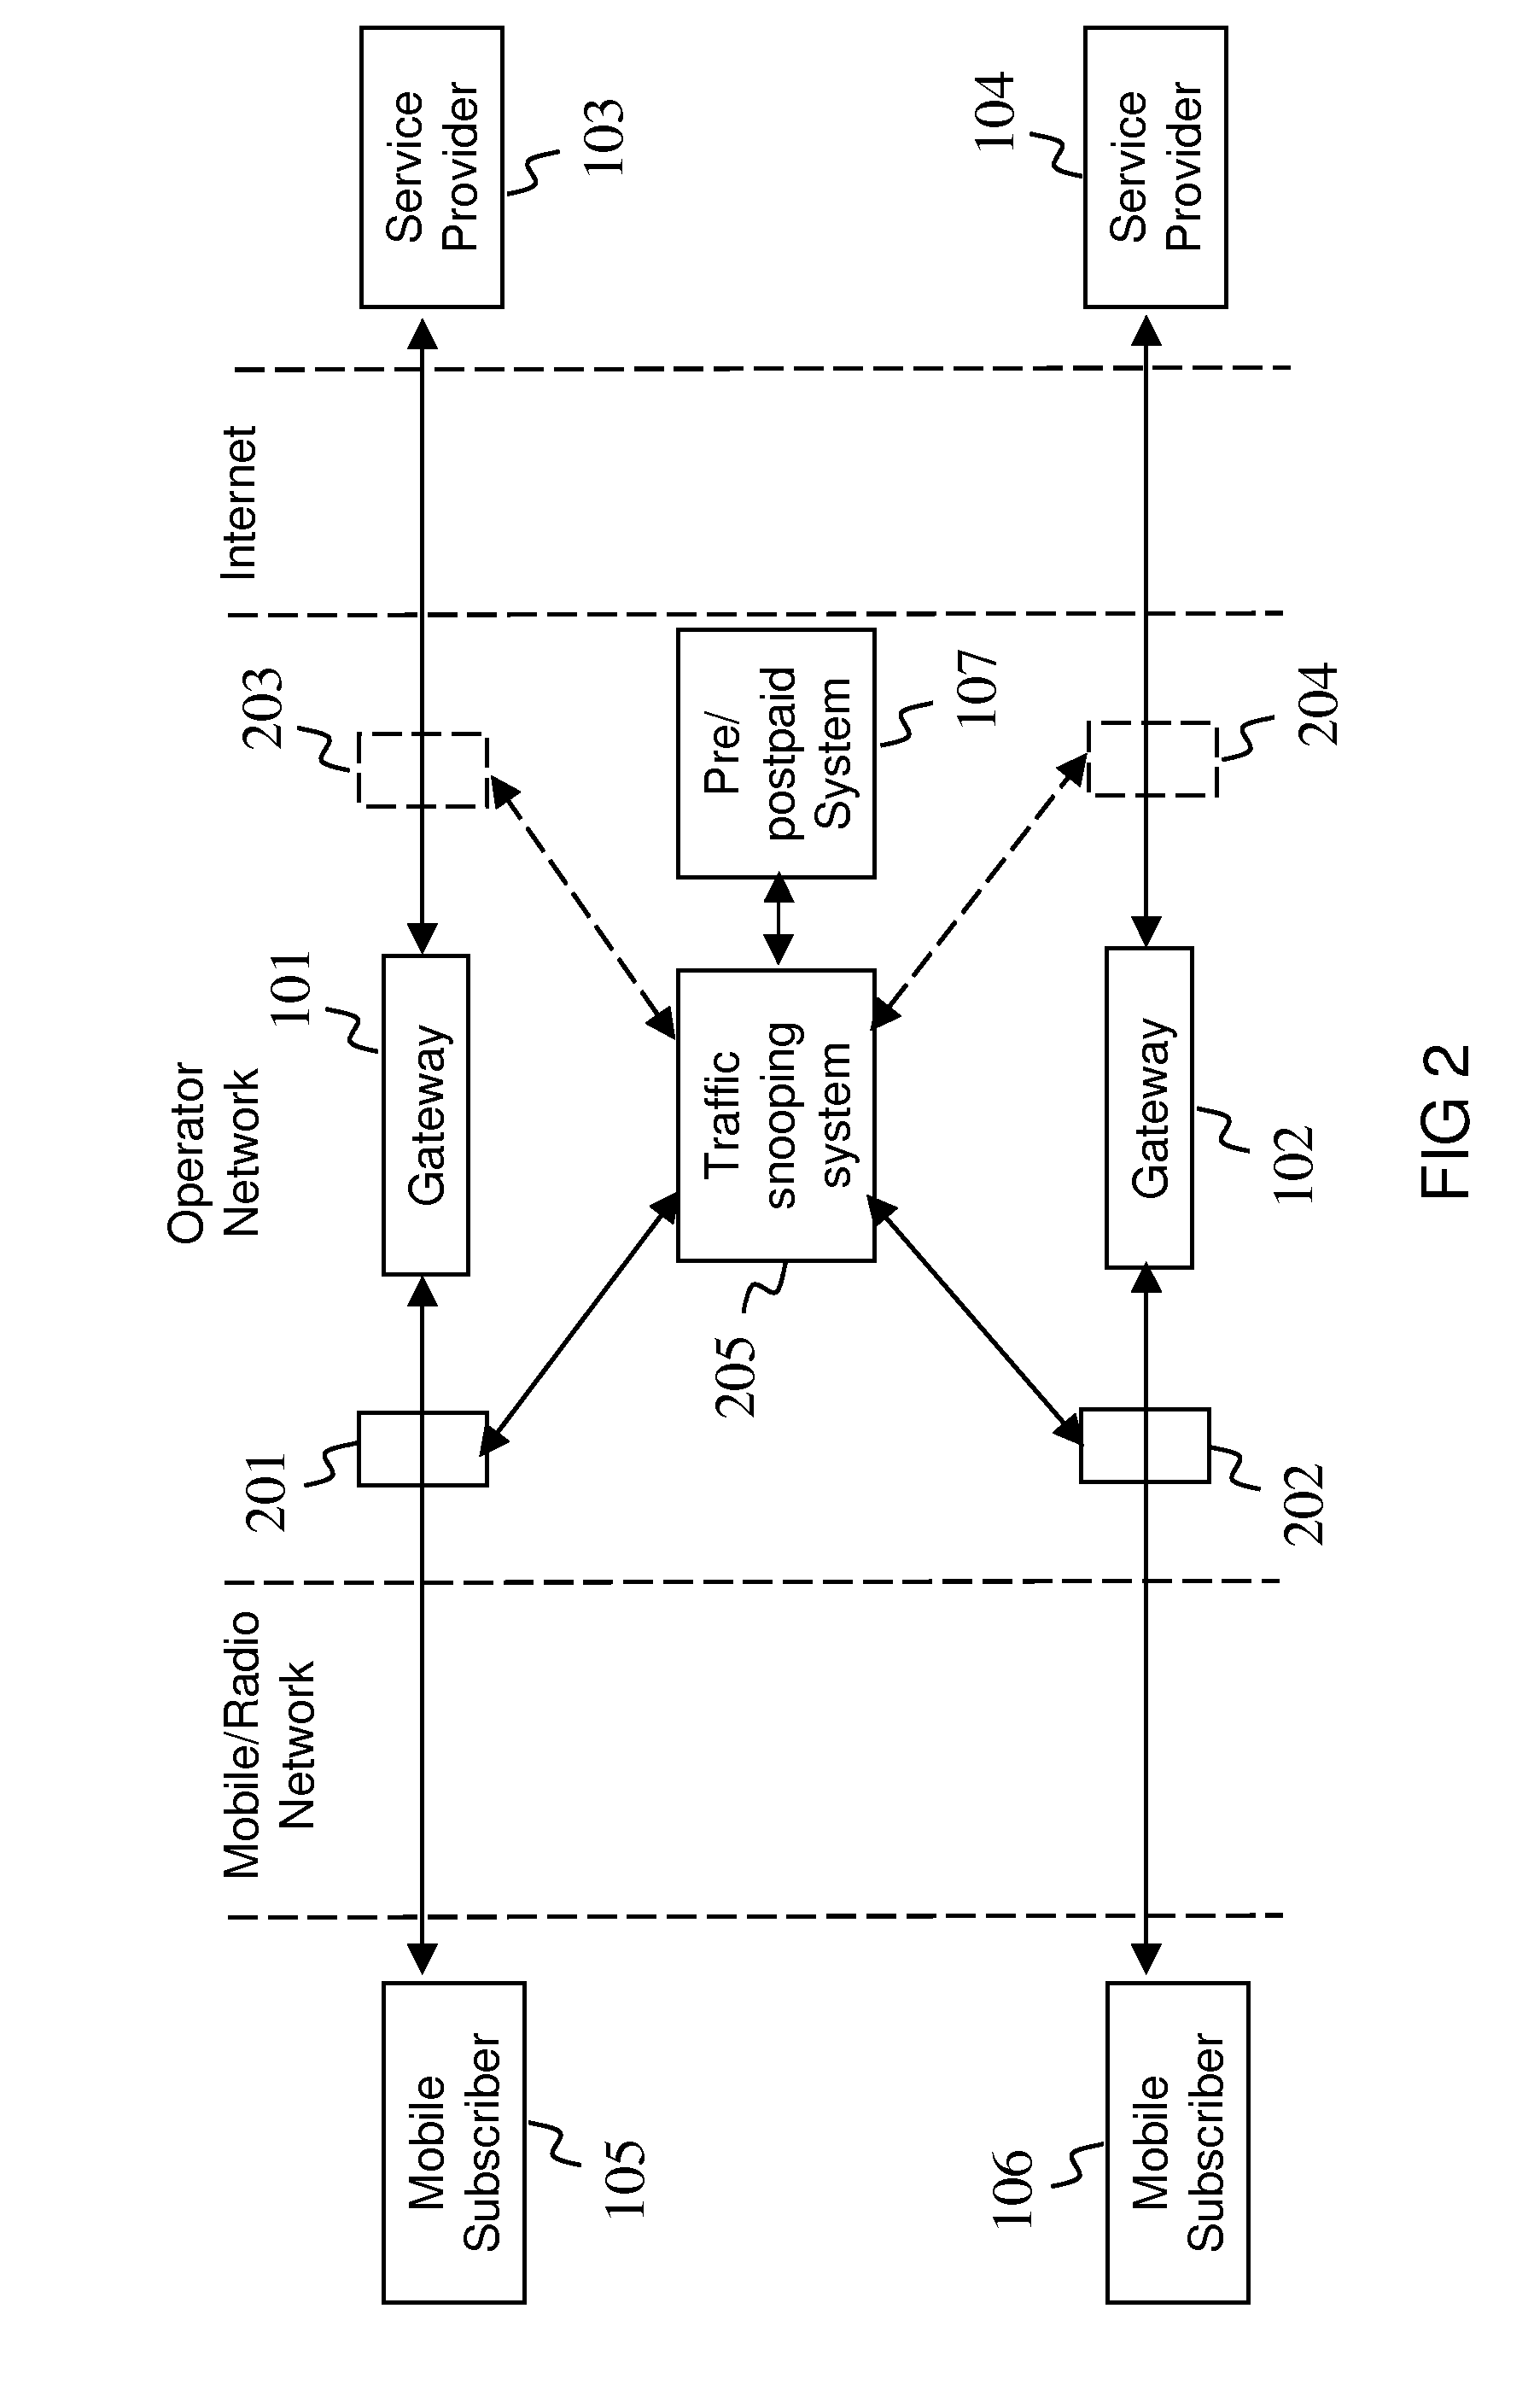 Information Gathering From Traffic Flow in a Communication Network